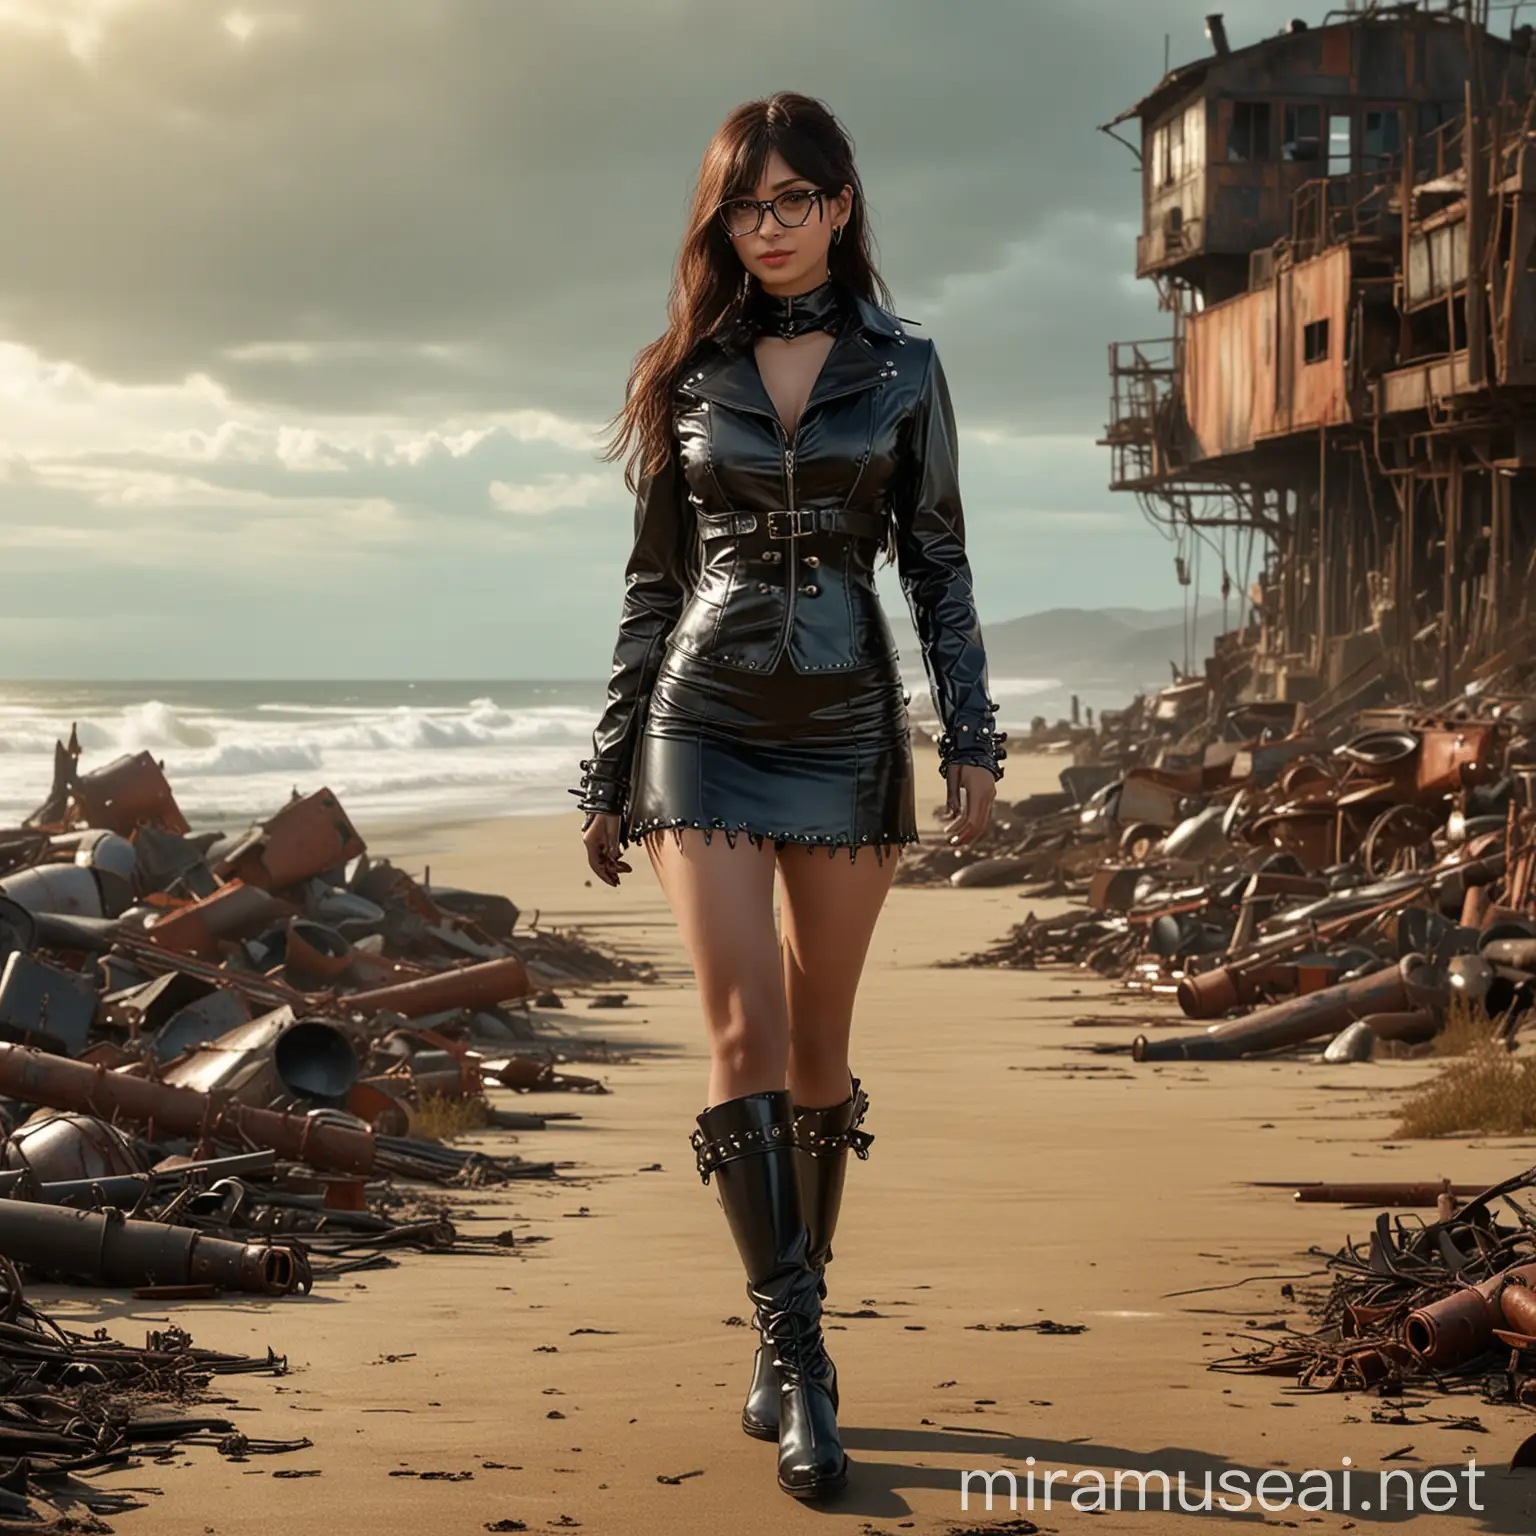 Richard, a man was playing Fallout on his PC when he pressed the button he appeared in the game in Santa Monica State Beach and transformed into a woman, daughter of Mia Khalifa and Hitomi Tanaka, wearing a latex corset, ((latex miniskirt) ) , ((high-heeled boots above the thigh)), long sleeveless latex gloves ((open jacket with spikes)) large round glasses and latex earrings, Fallout World Steampunk, Aiko has a striking appearance, combining latex elements of his two famous mothers. She inherited Mia Khalifa's expressive and captivating eyes, while her curvaceous and voluptuous figure is reminiscent of Hitomi Tanaka. Her hair is long and silky, with a dark brown tone that stands out in the sun. She has an imposing and confident presence, but also radiates an aura of elegance and charm with a beautiful smile, as she walks sensually towards the camera showing her entire body, in a setting destroyed by radiation, all rusty and full of metal, with the sea in the background, epic masterpiece, cinematic experience, 8k, fantasy digital art, HDR, UHD. This contrast between the fantastical character and the more traditional color scheme and elements gives the piece an intriguing narrative quality. The model is sitting cross-legged on the sand in a sexy position looking
to the camera. old junkyard,,((wearing a latex backpack))Full body 